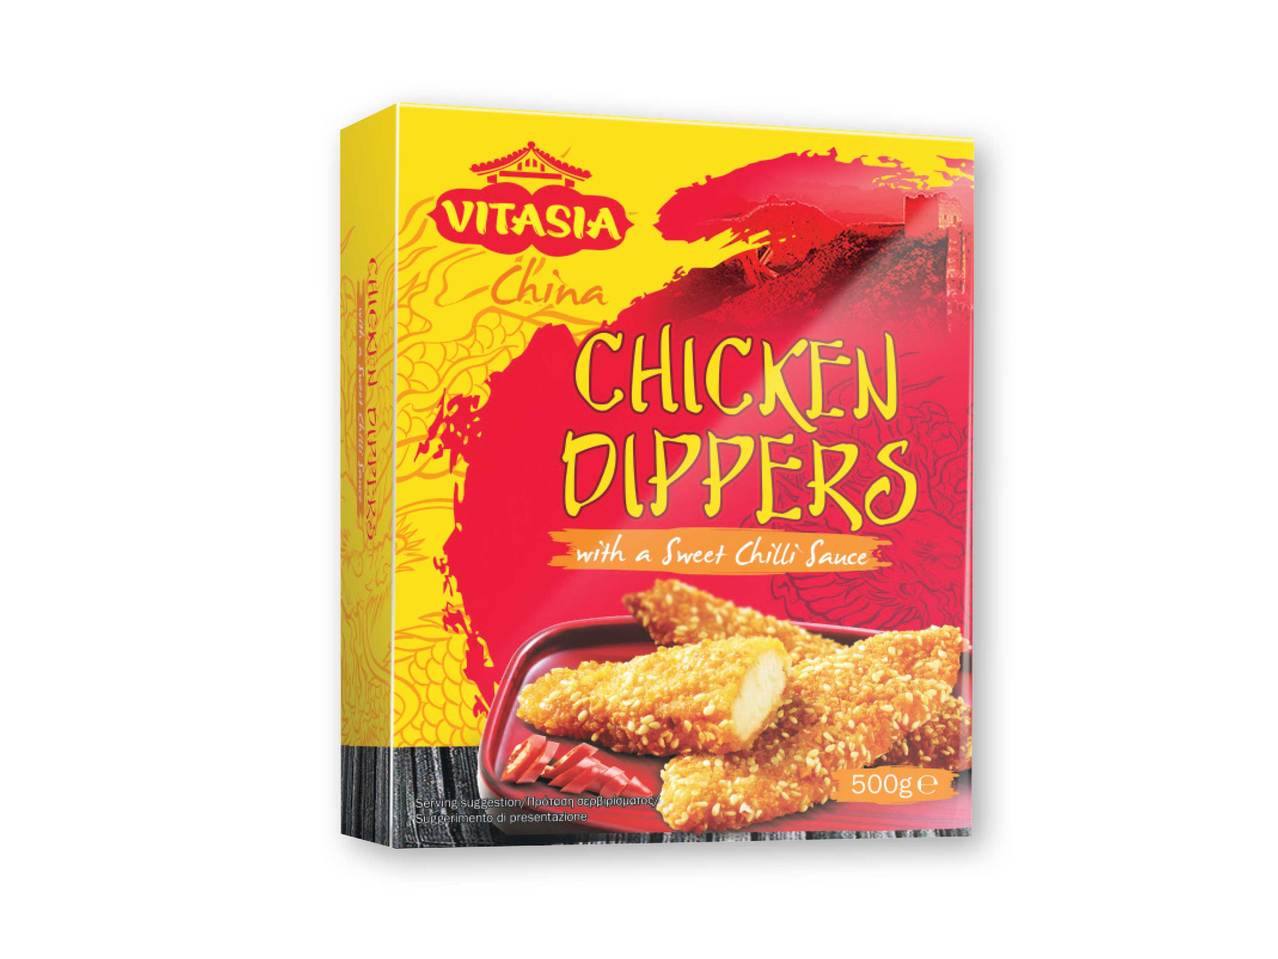 VITASIA Chicken Dippers